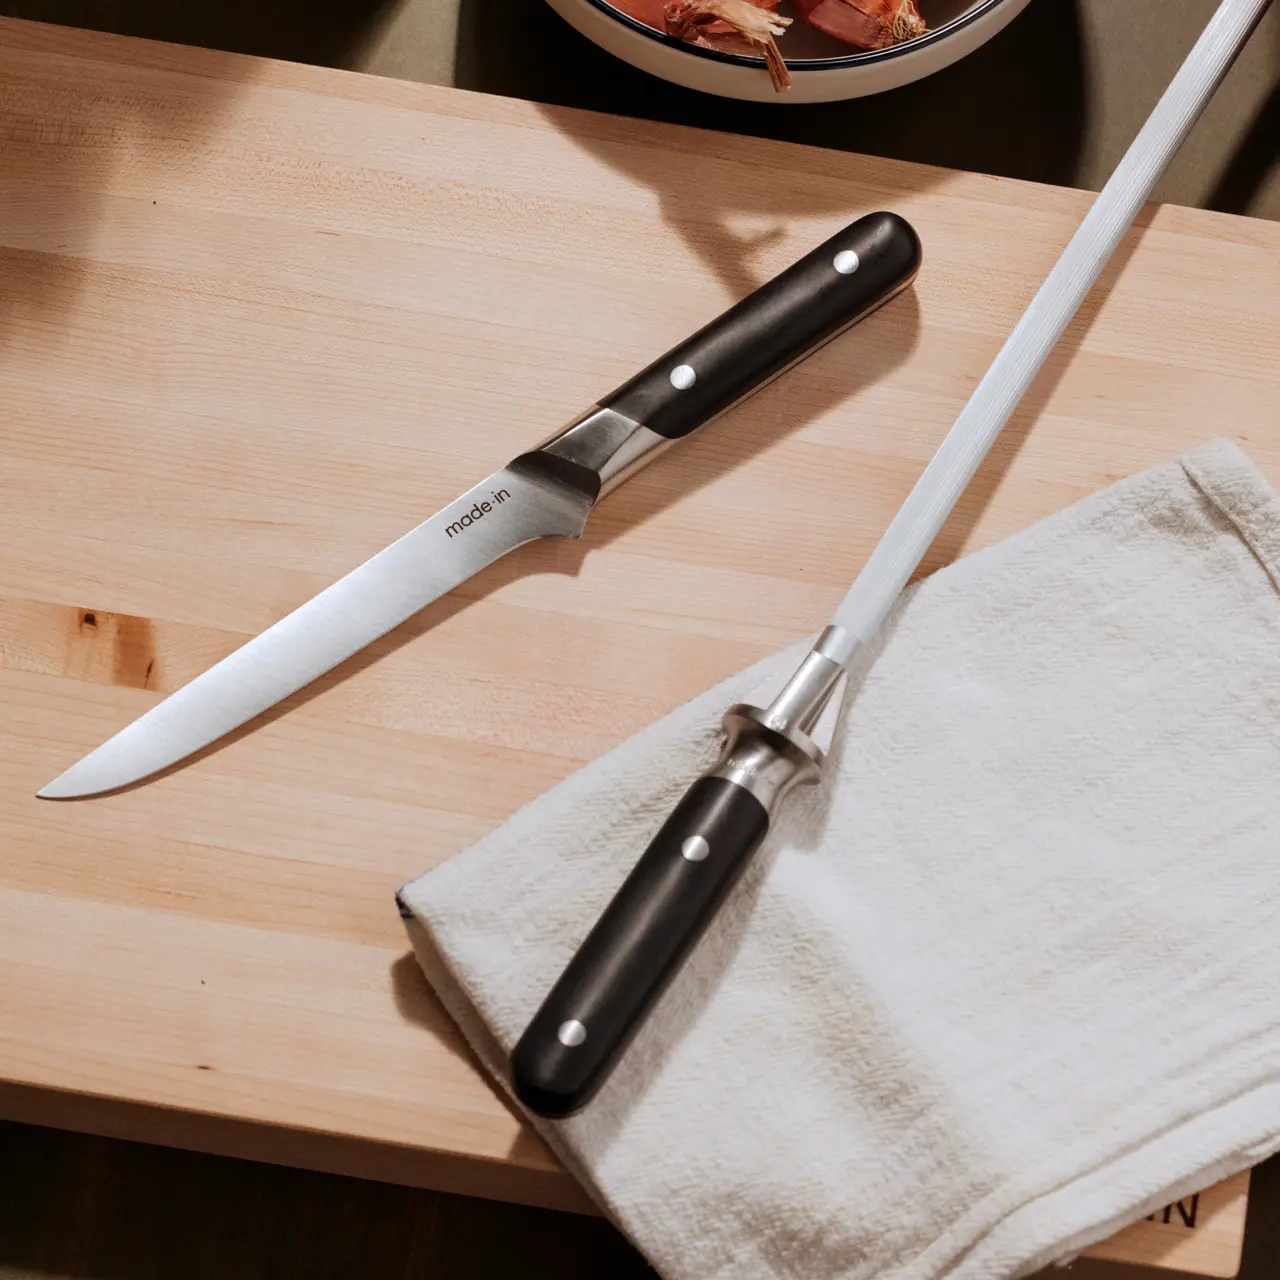 A chef's knife and a paring knife are placed on a wooden surface next to a folded kitchen towel.